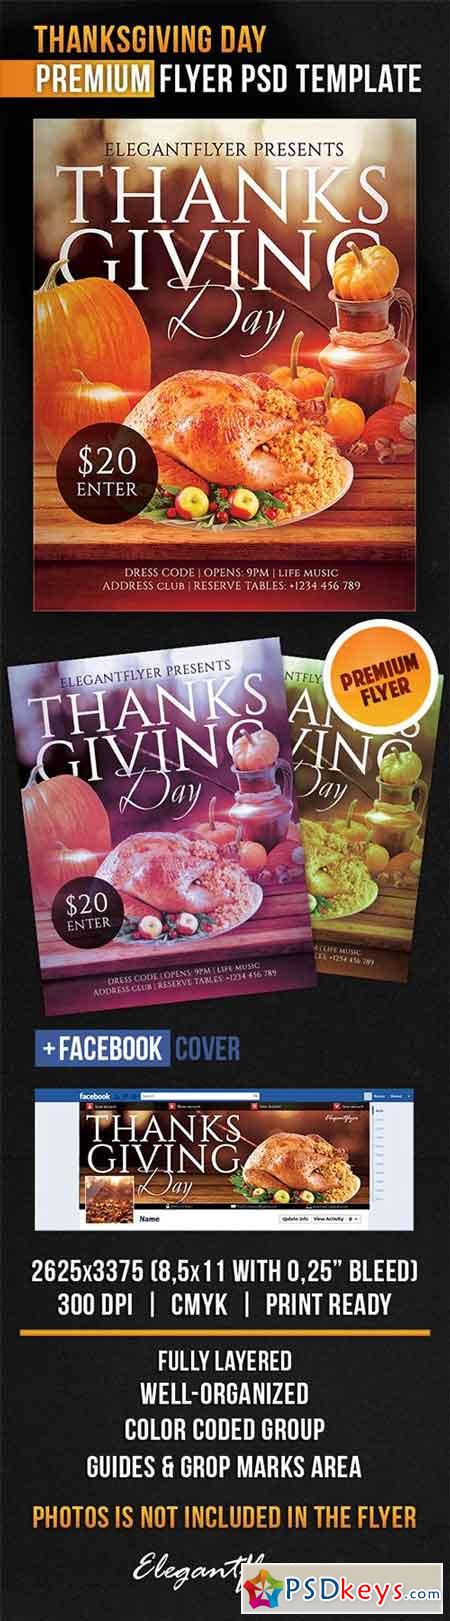 Thanksgiving Day Flyer PSD Template + Facebook Covers